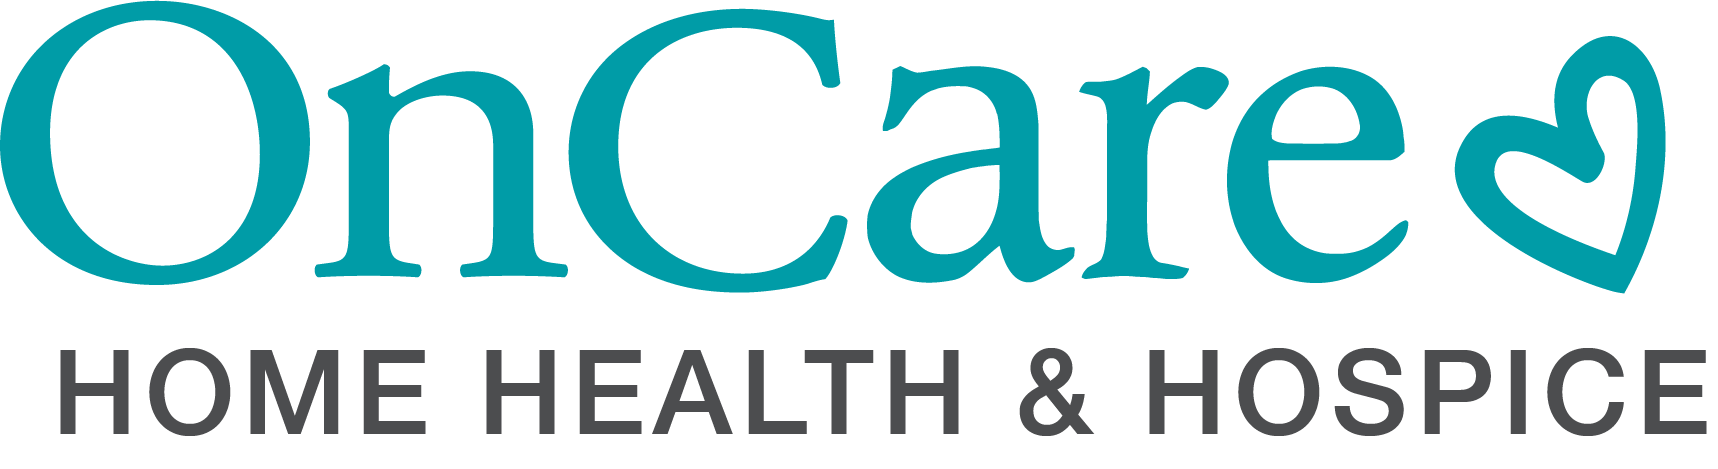 Heritage OnCare Home Health logo